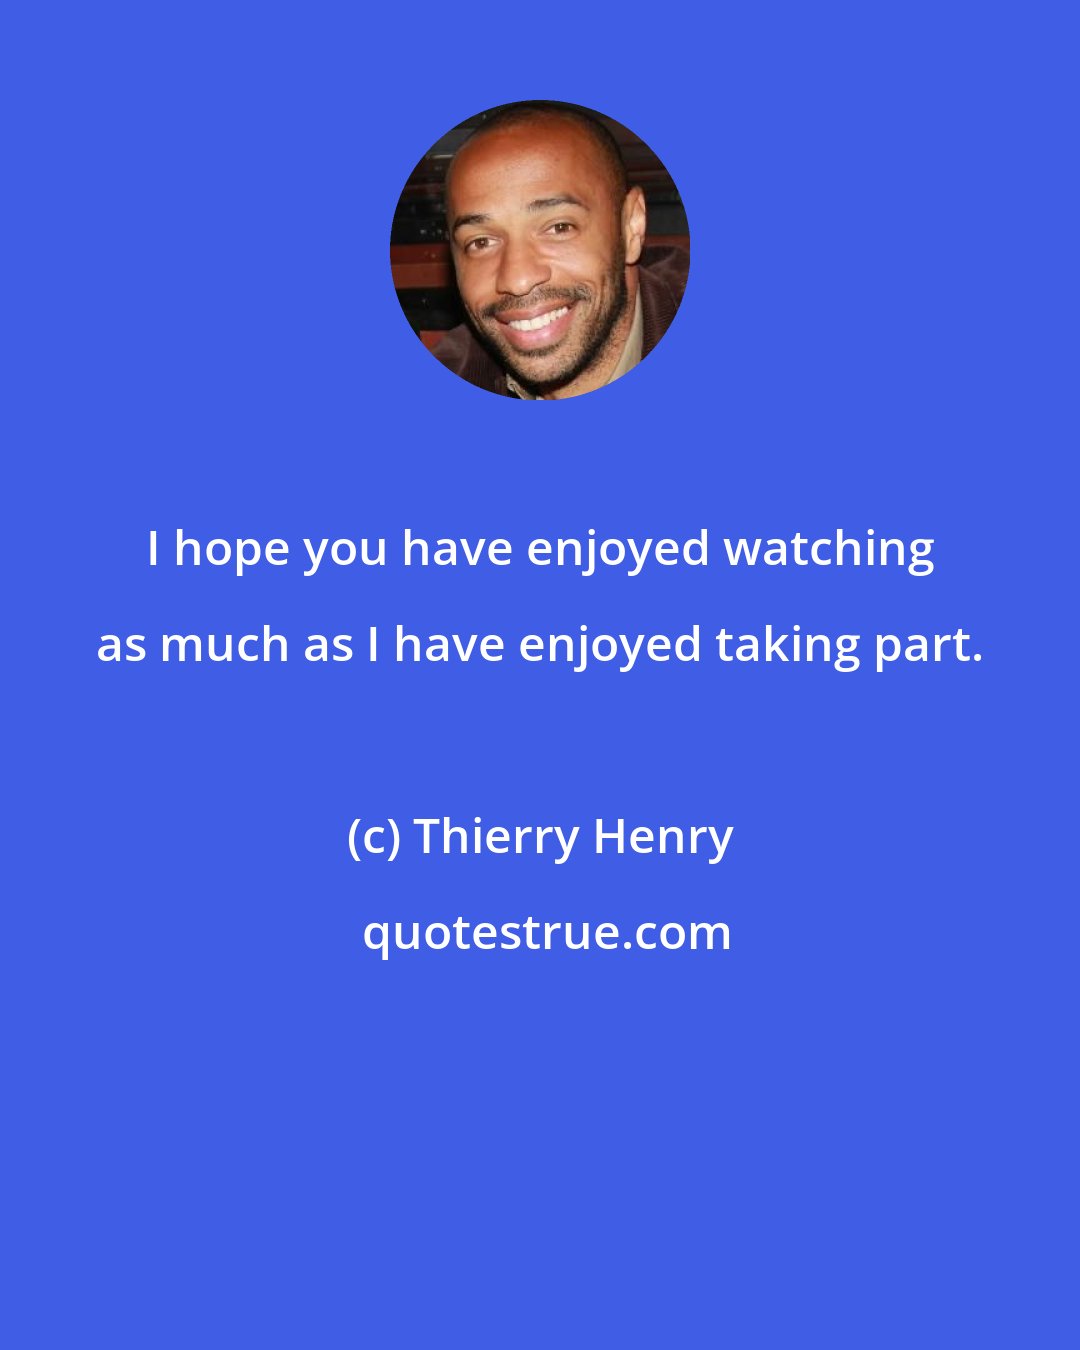 Thierry Henry: I hope you have enjoyed watching as much as I have enjoyed taking part.